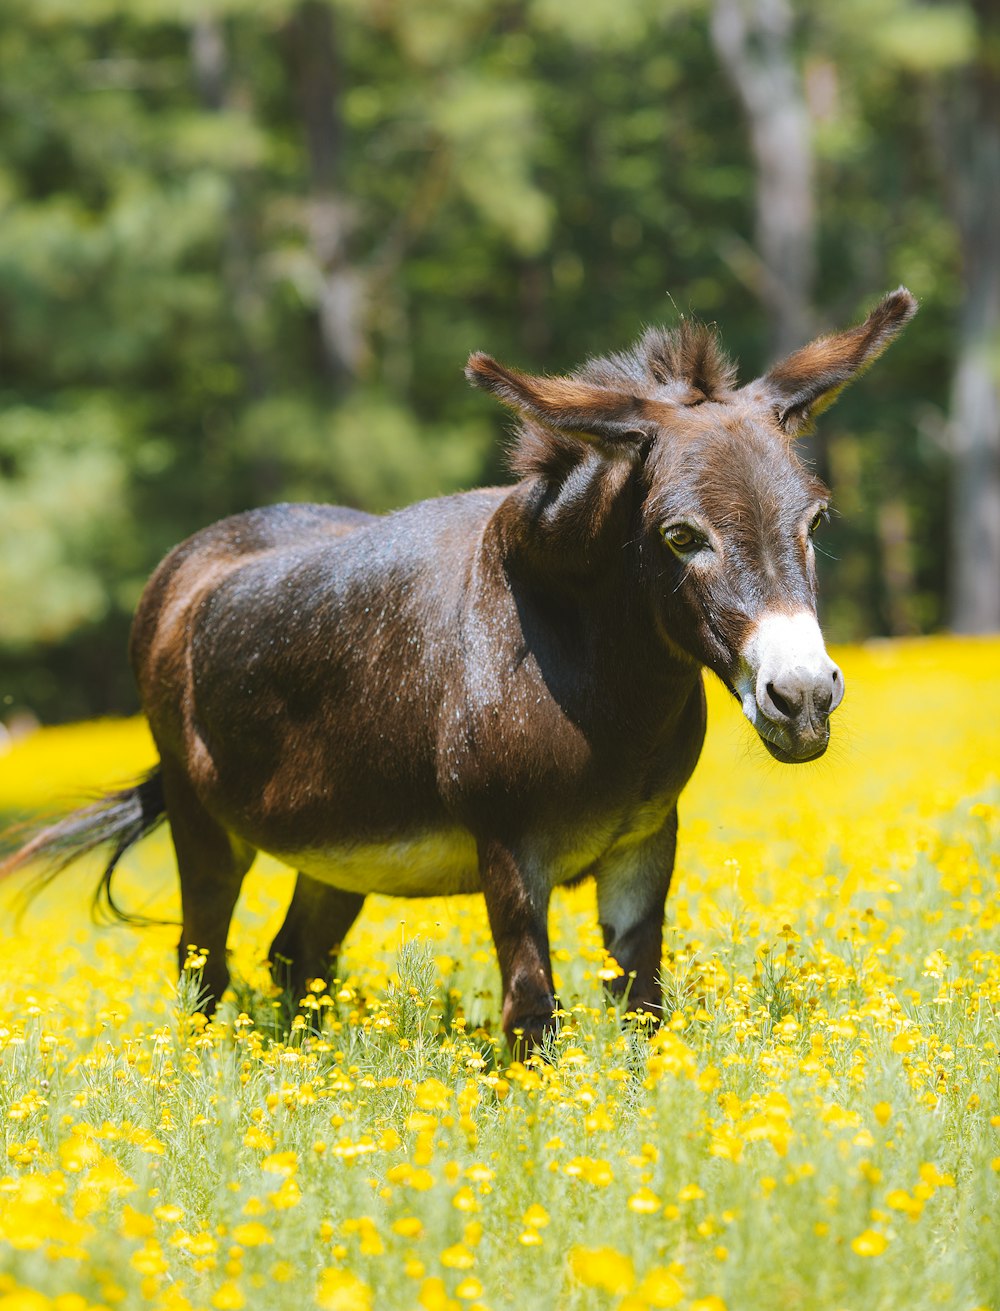 a small horse standing in a field of yellow flowers